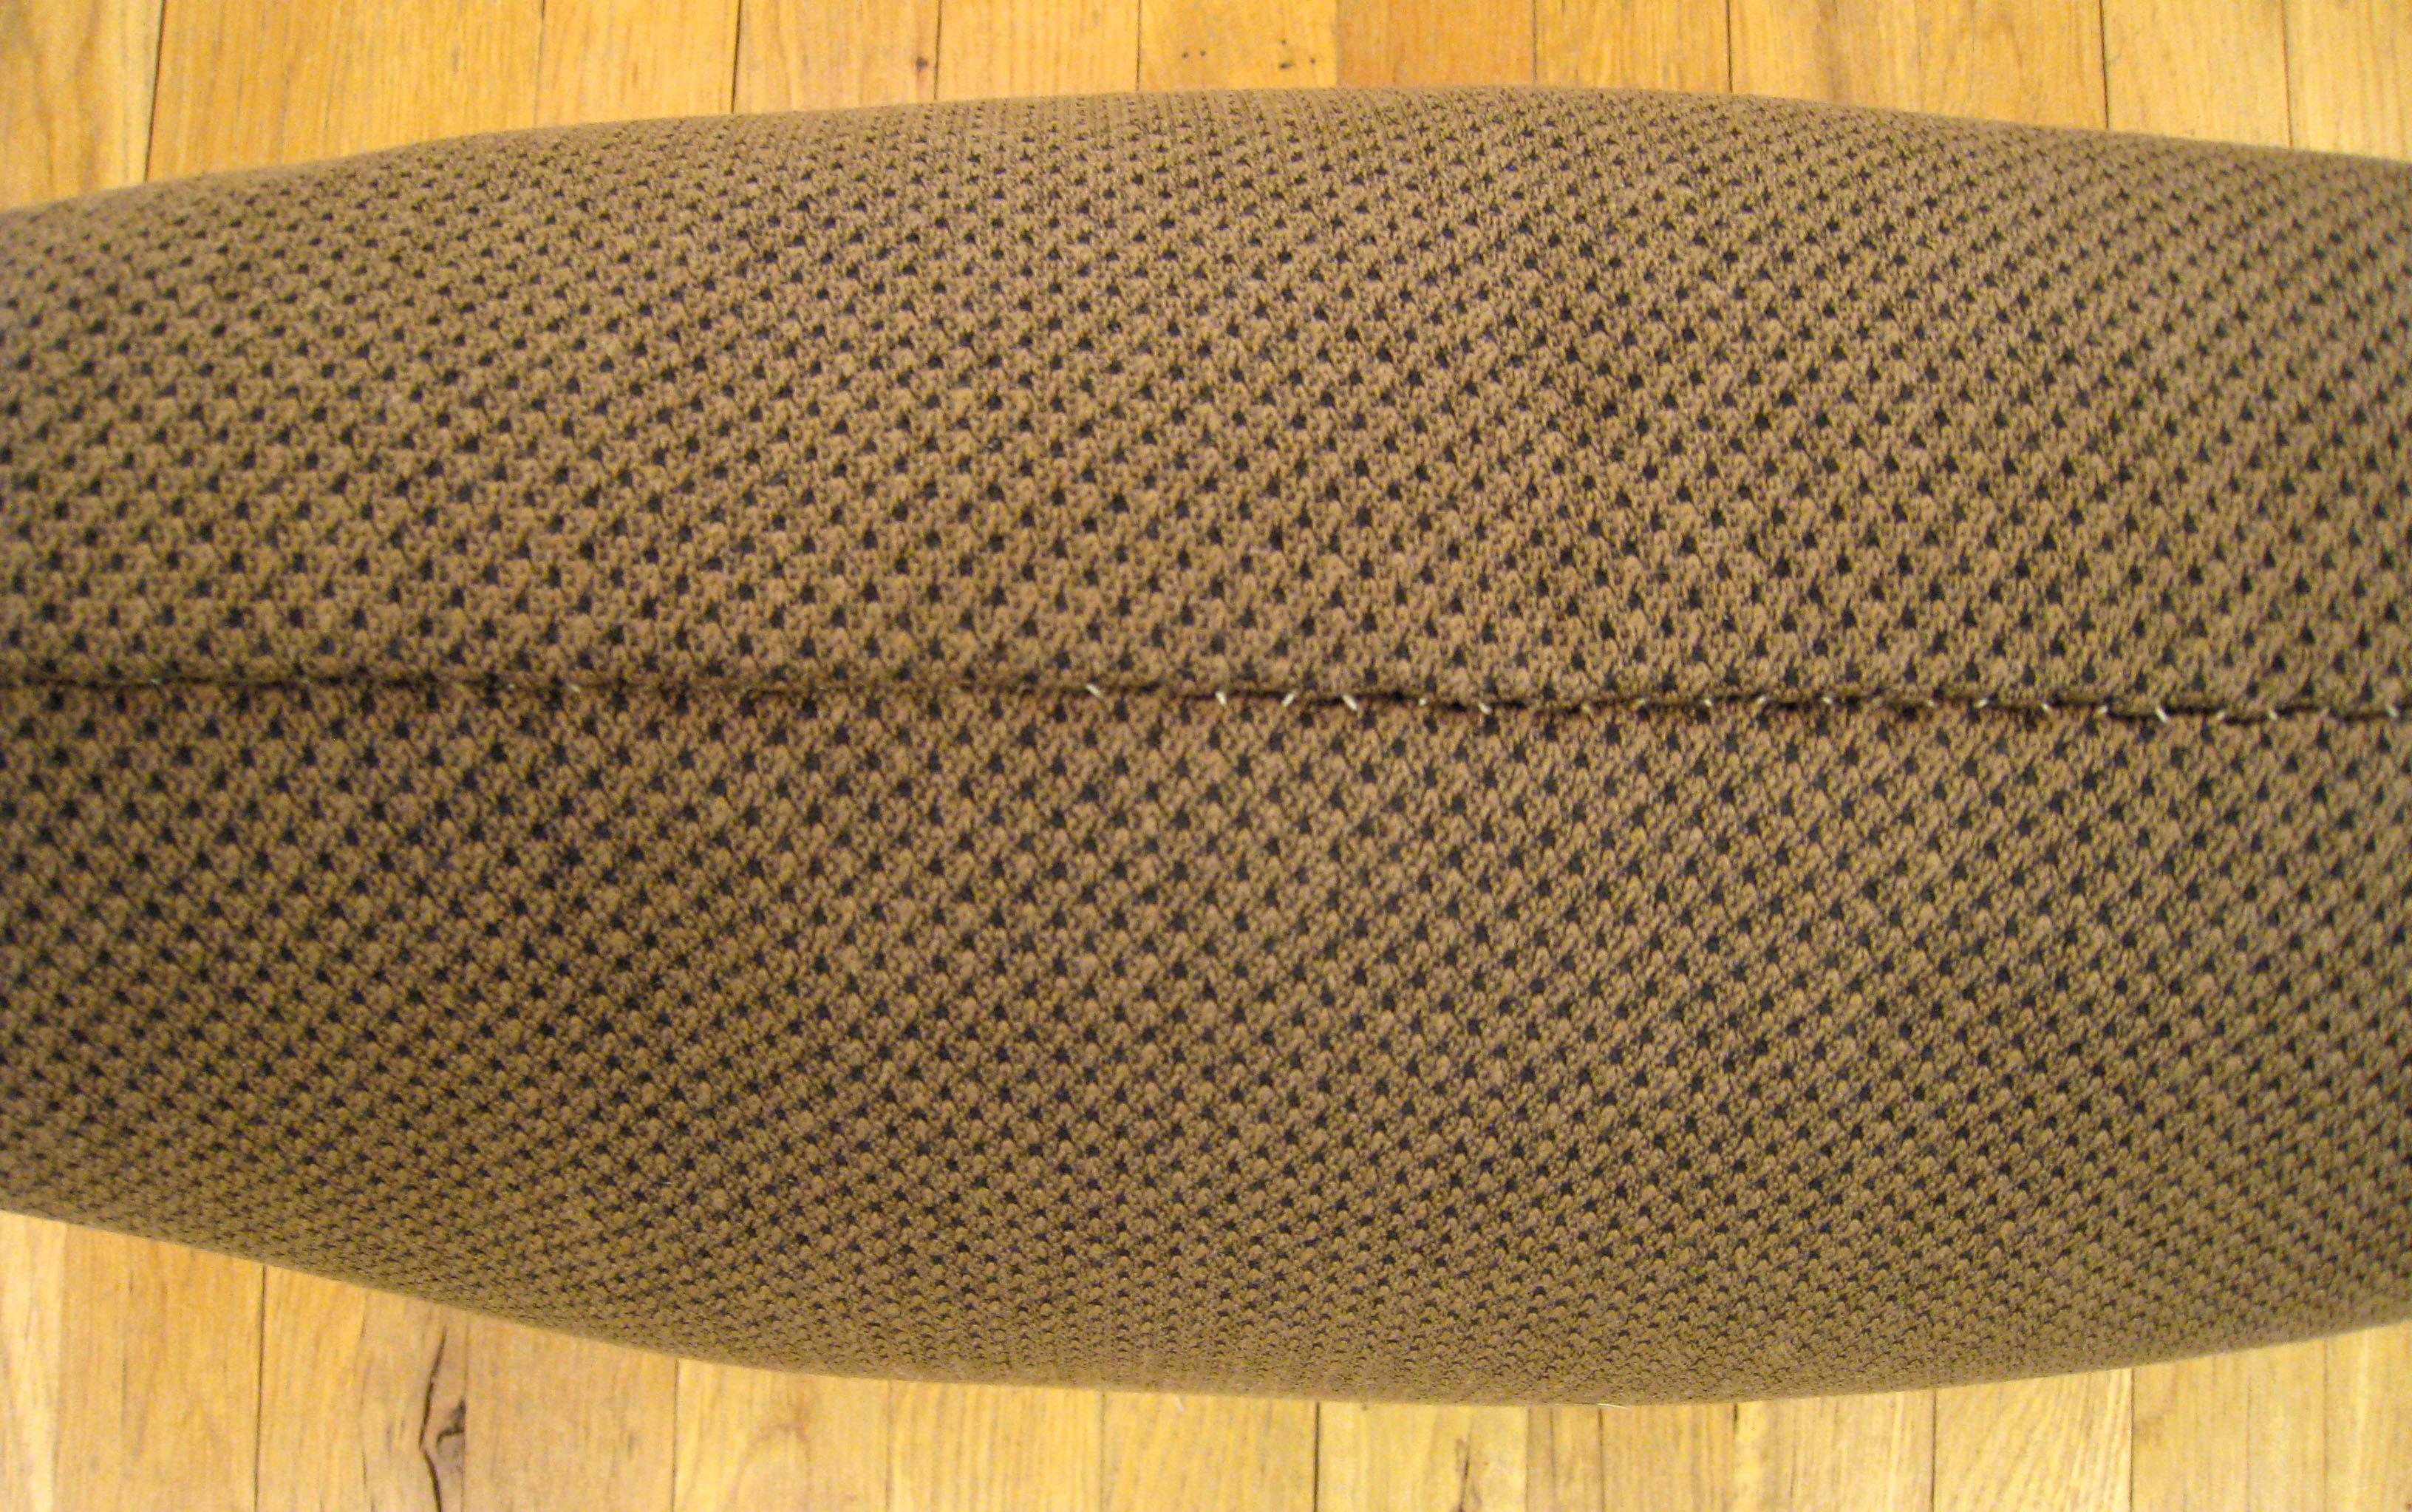 Vintage Decorative Brown Fabric Pillow, Double-Sided In Fair Condition For Sale In New York, NY